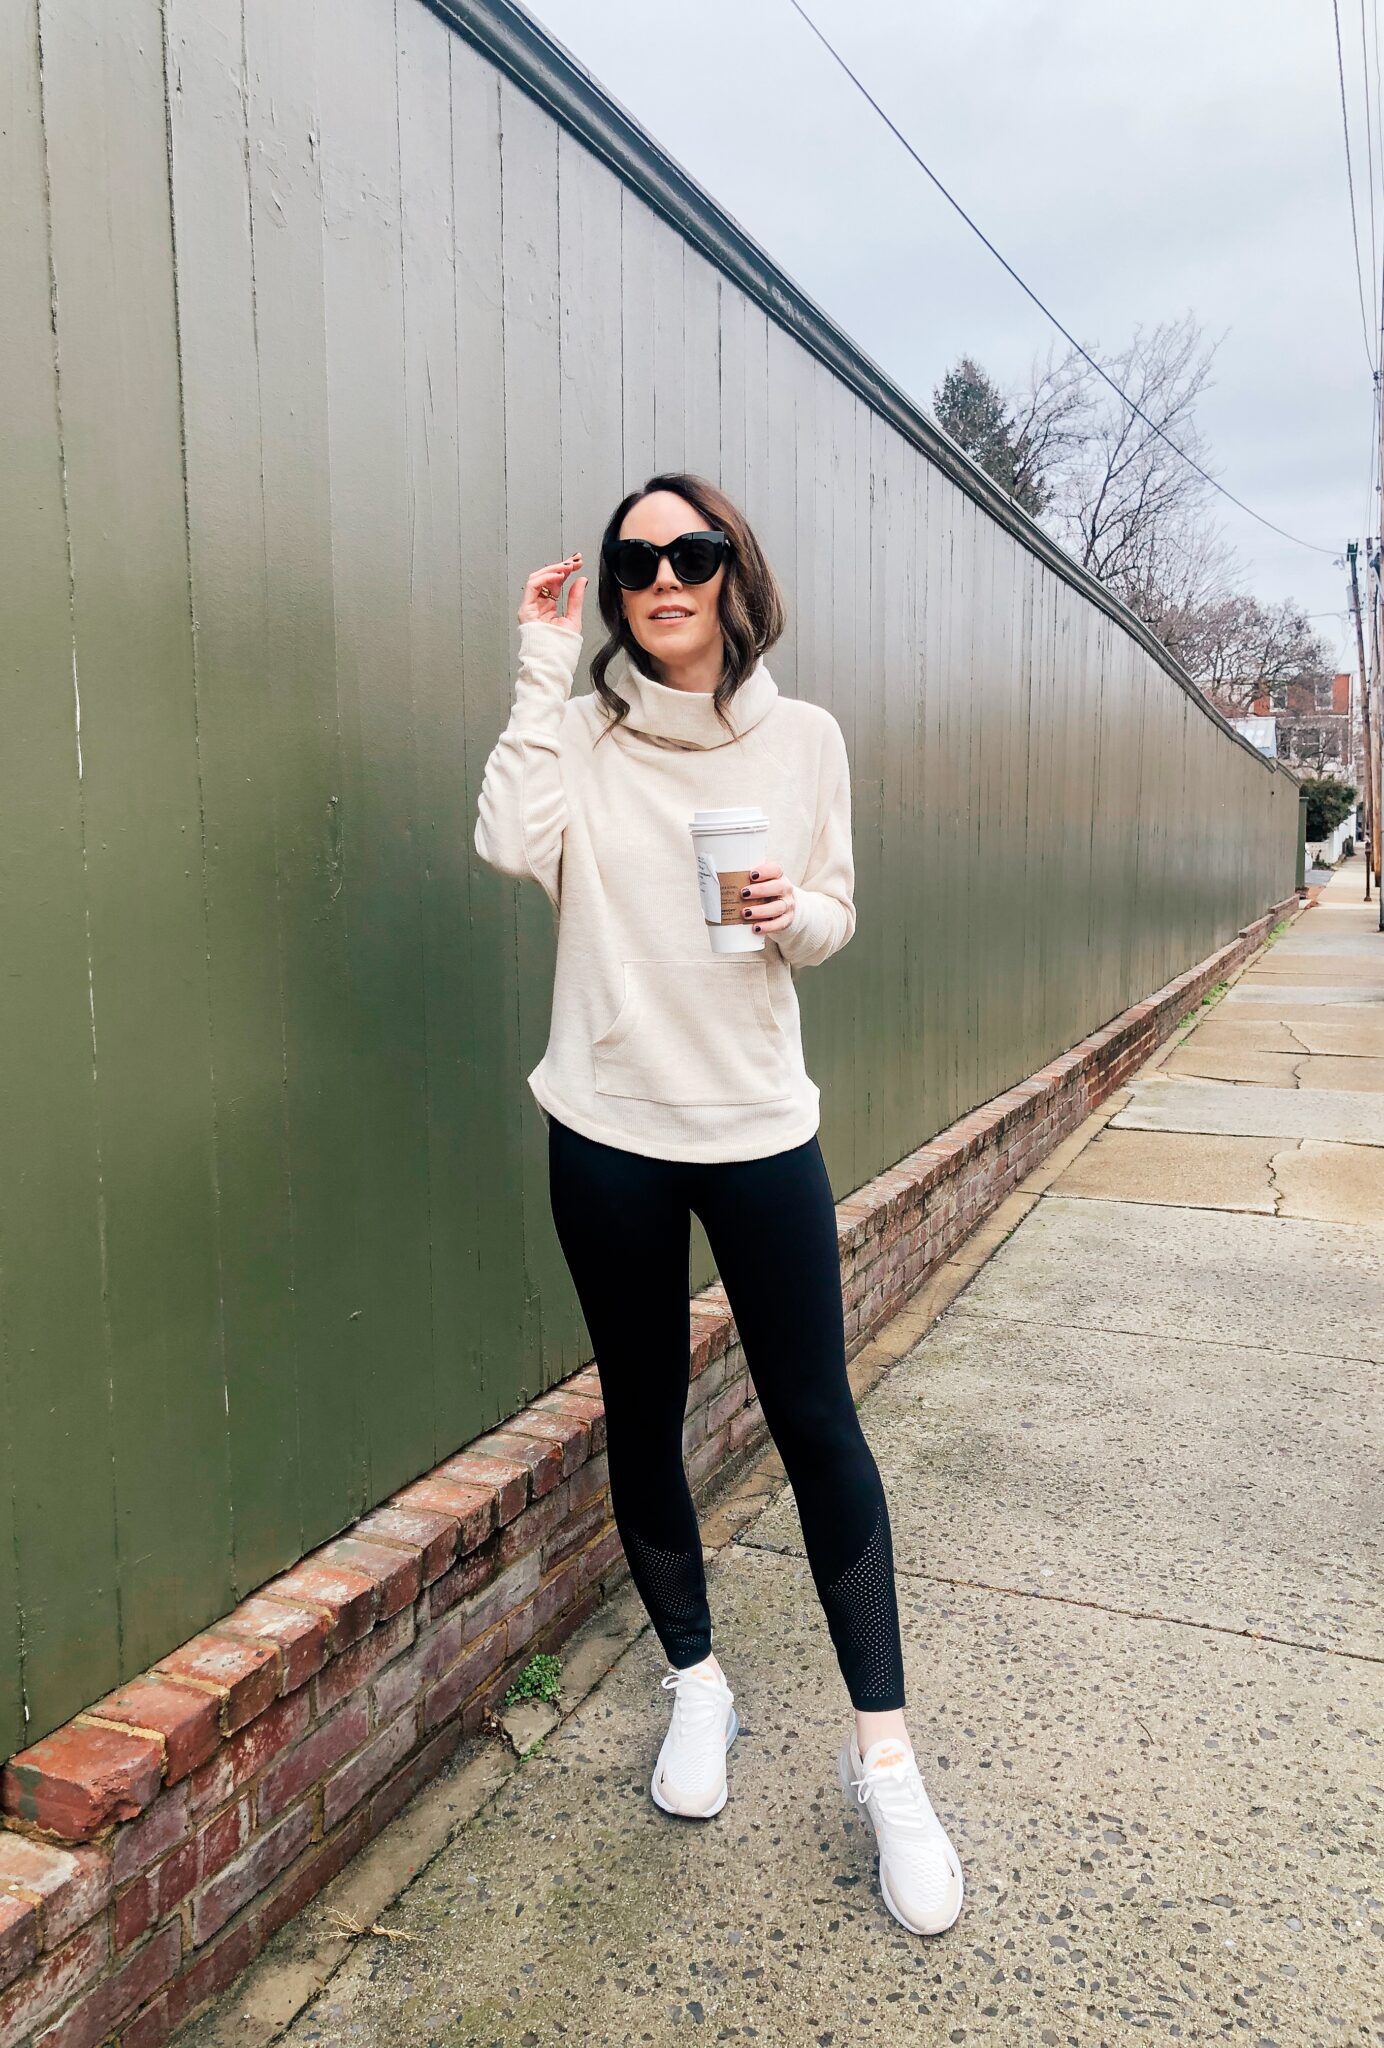 Sweatshirt and Black Legging Outfit Ideas